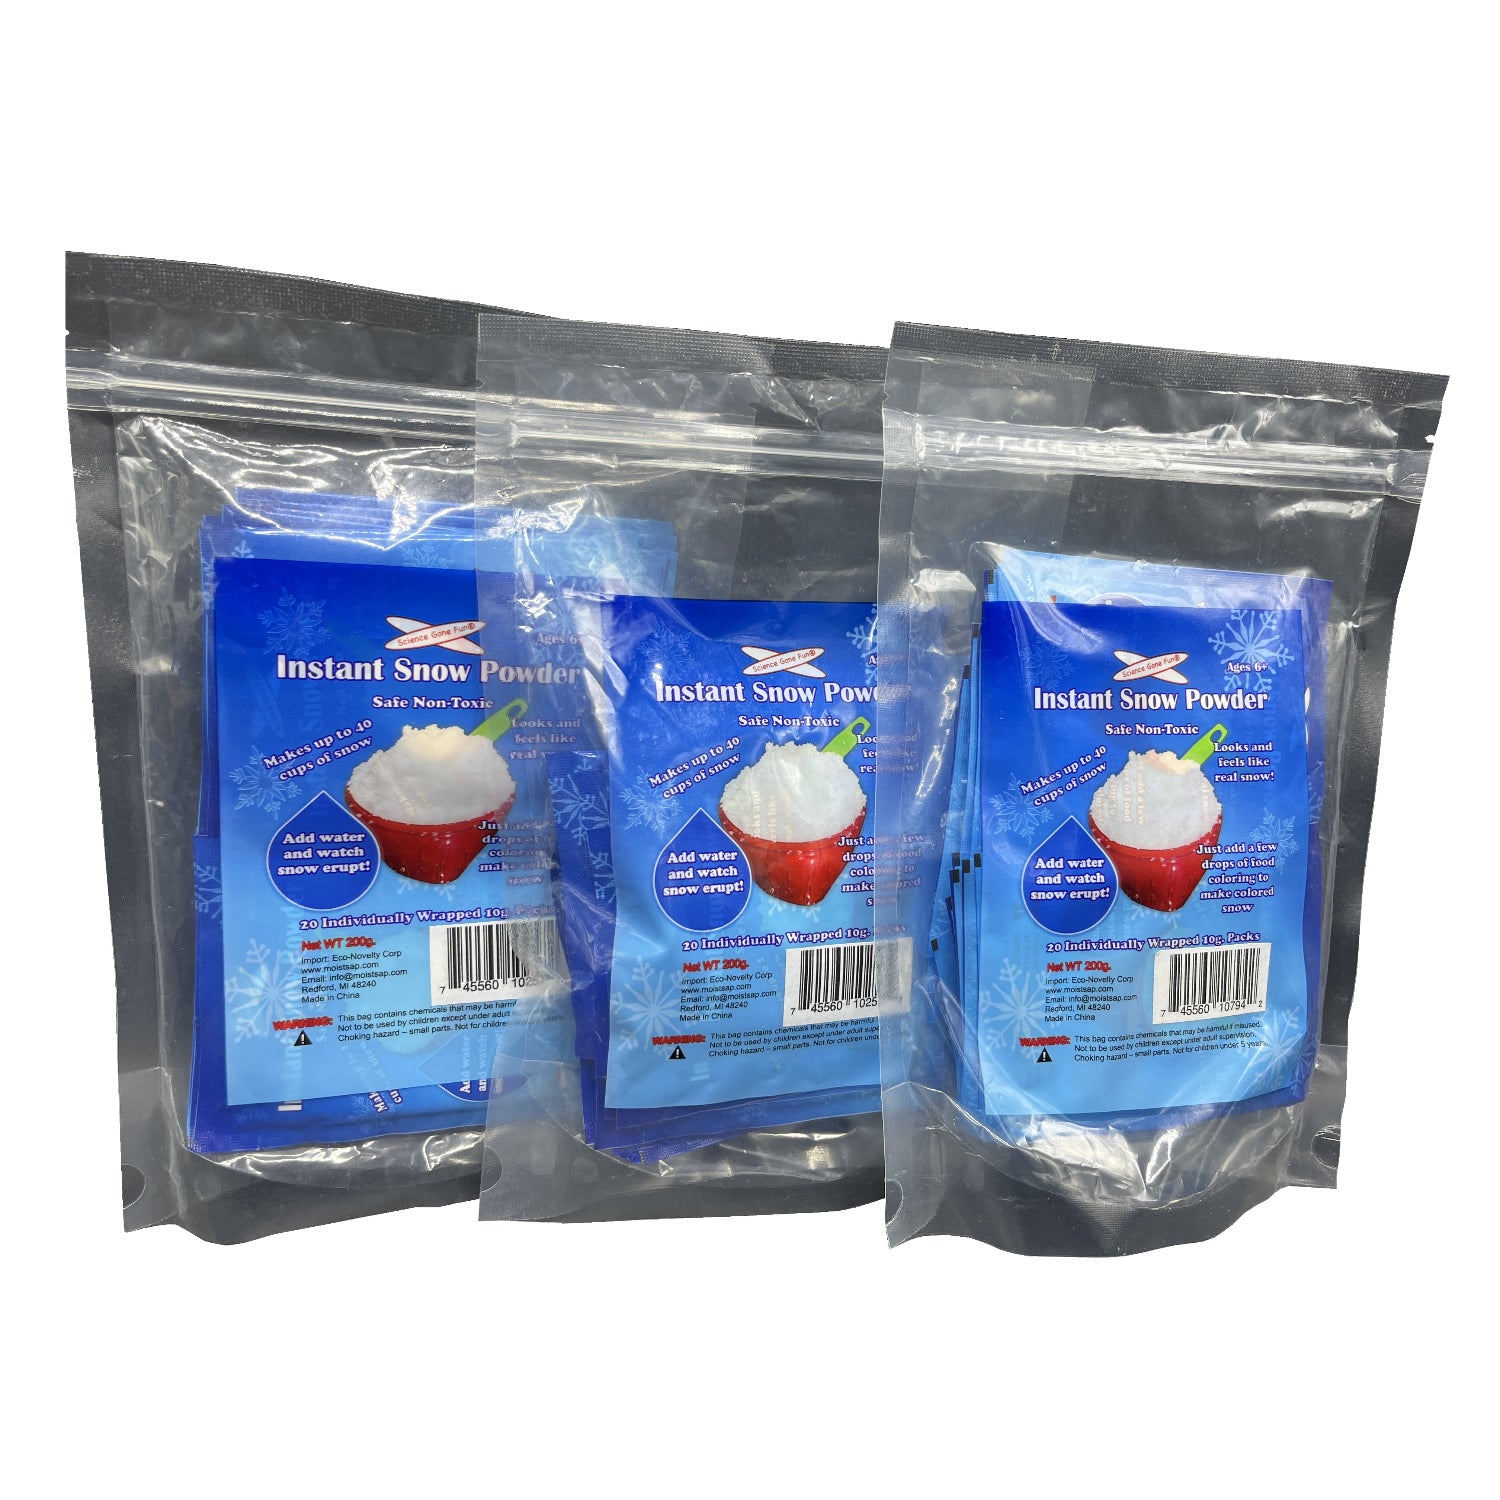 60-Pack of 10g. Instant Snow Powder